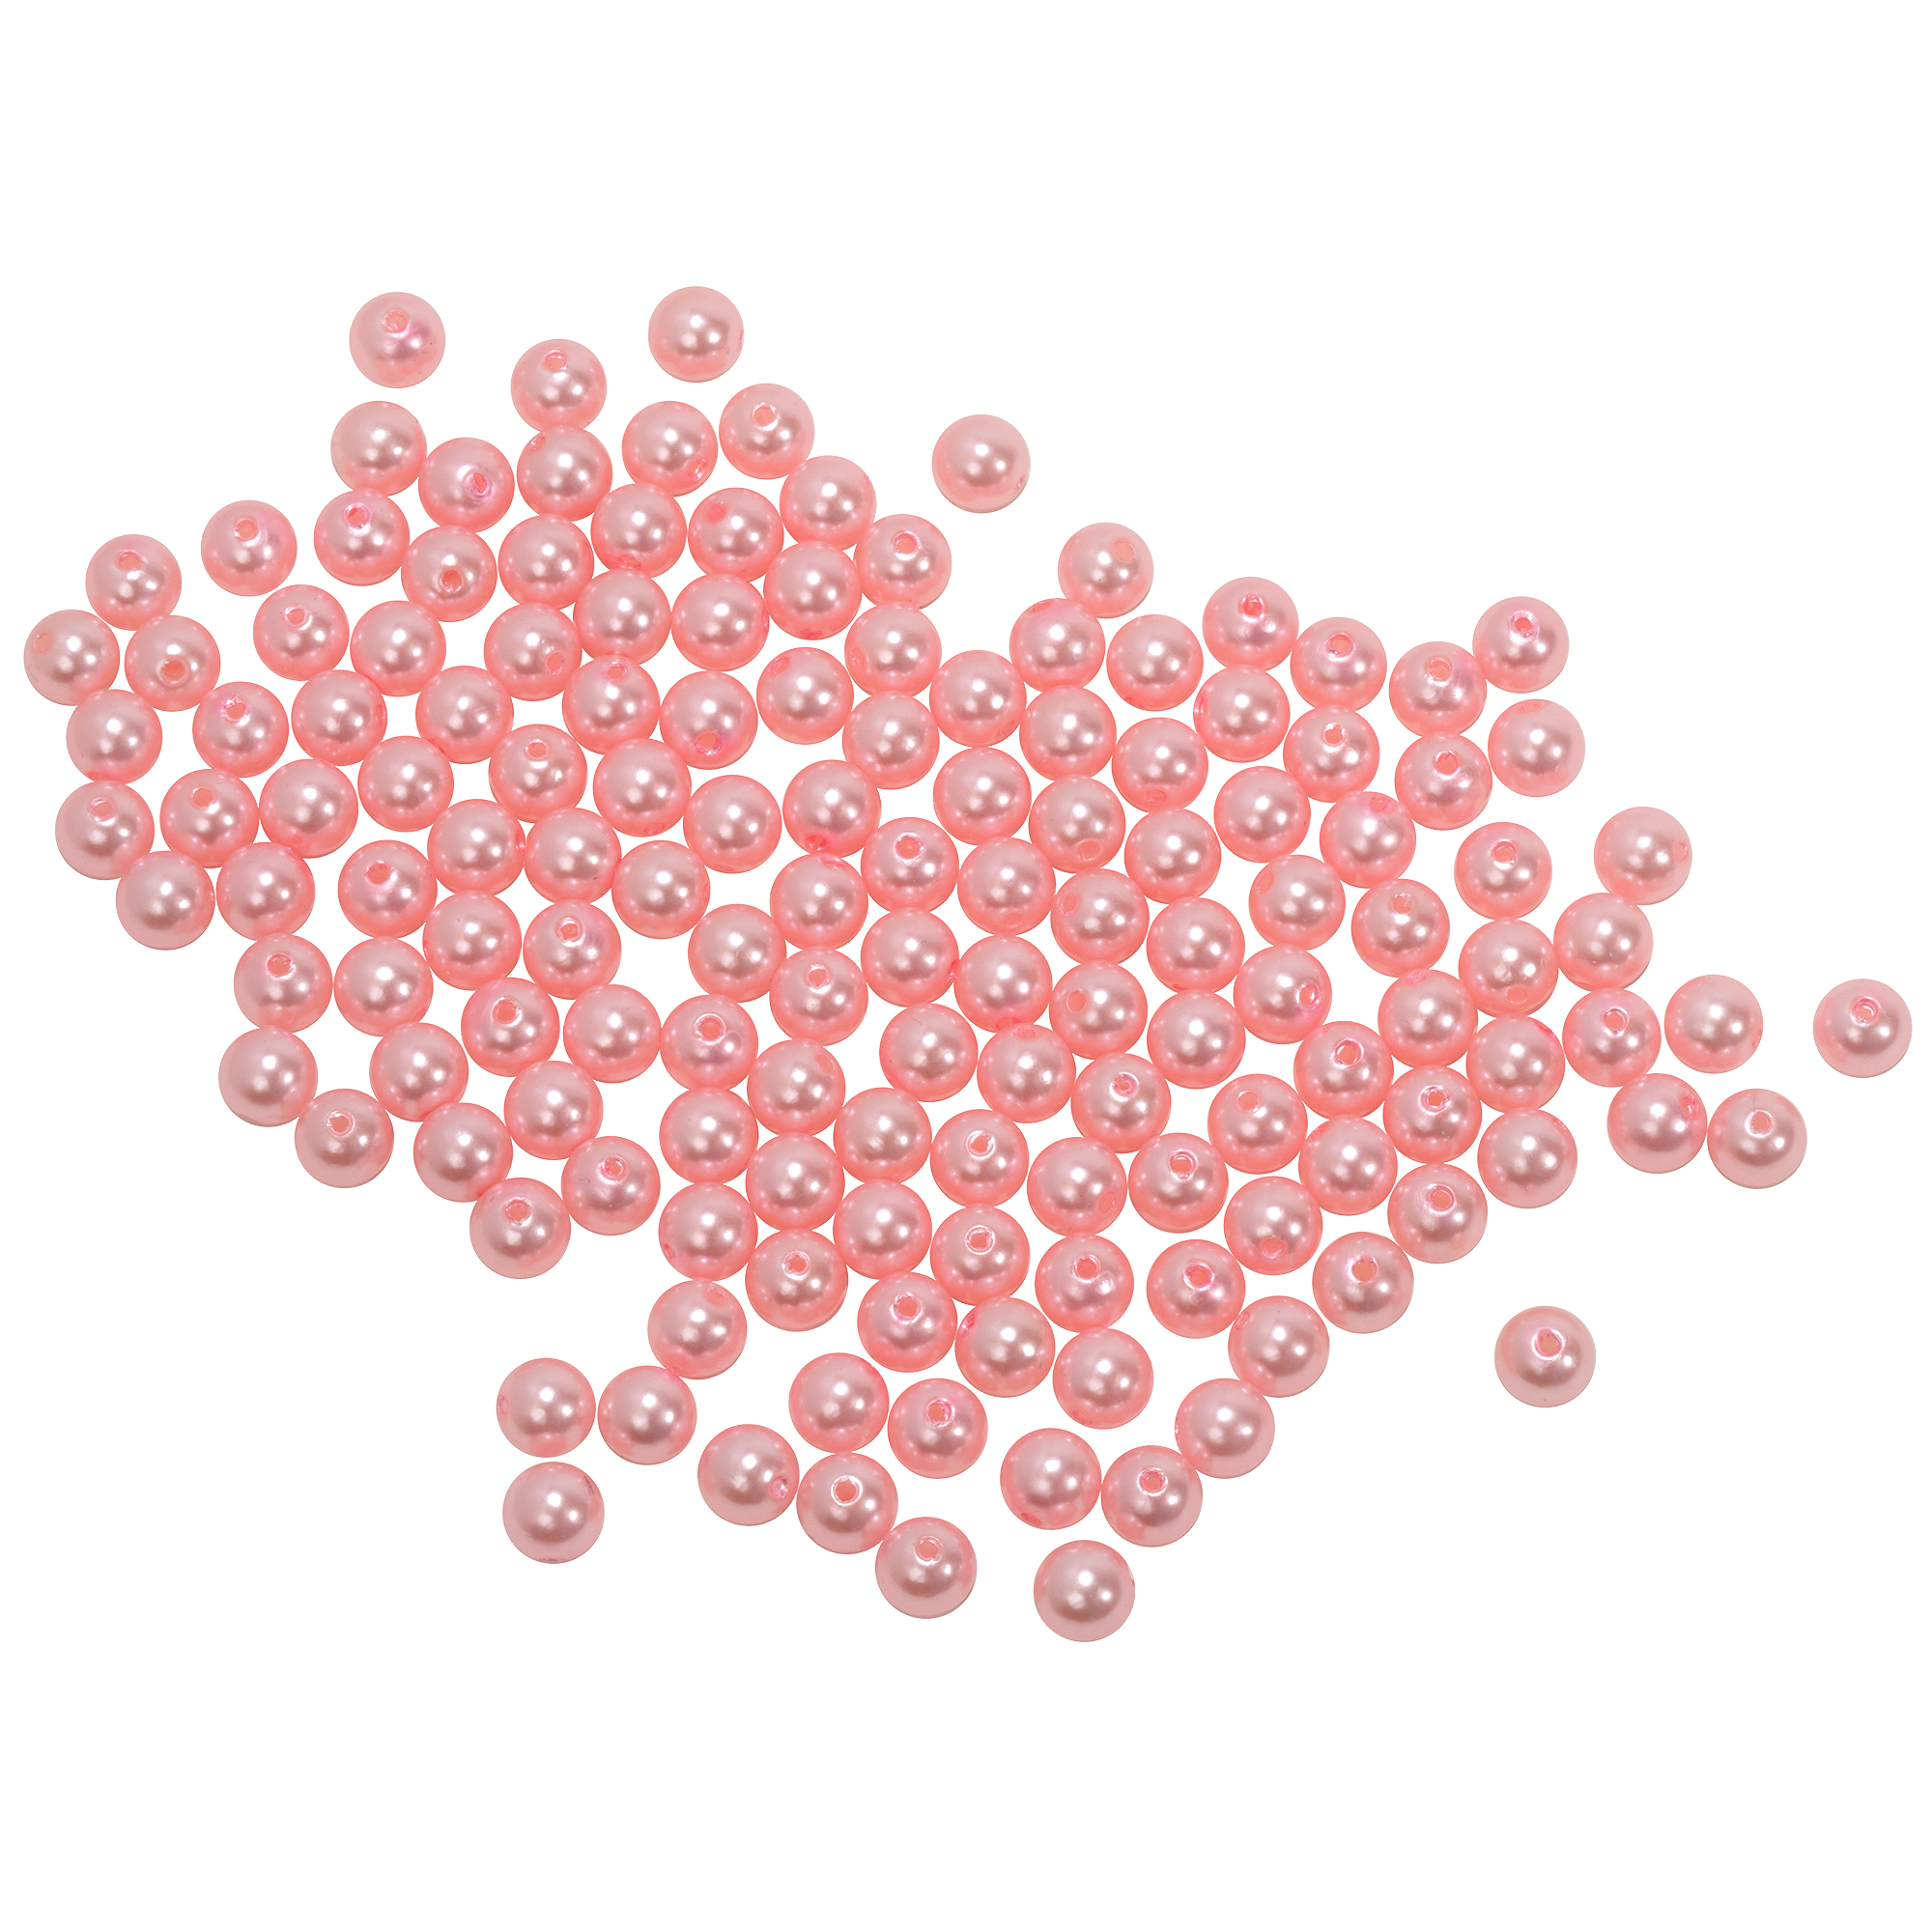 10mm Craft Pearl Beads With Hole 454g/Bag - Pink